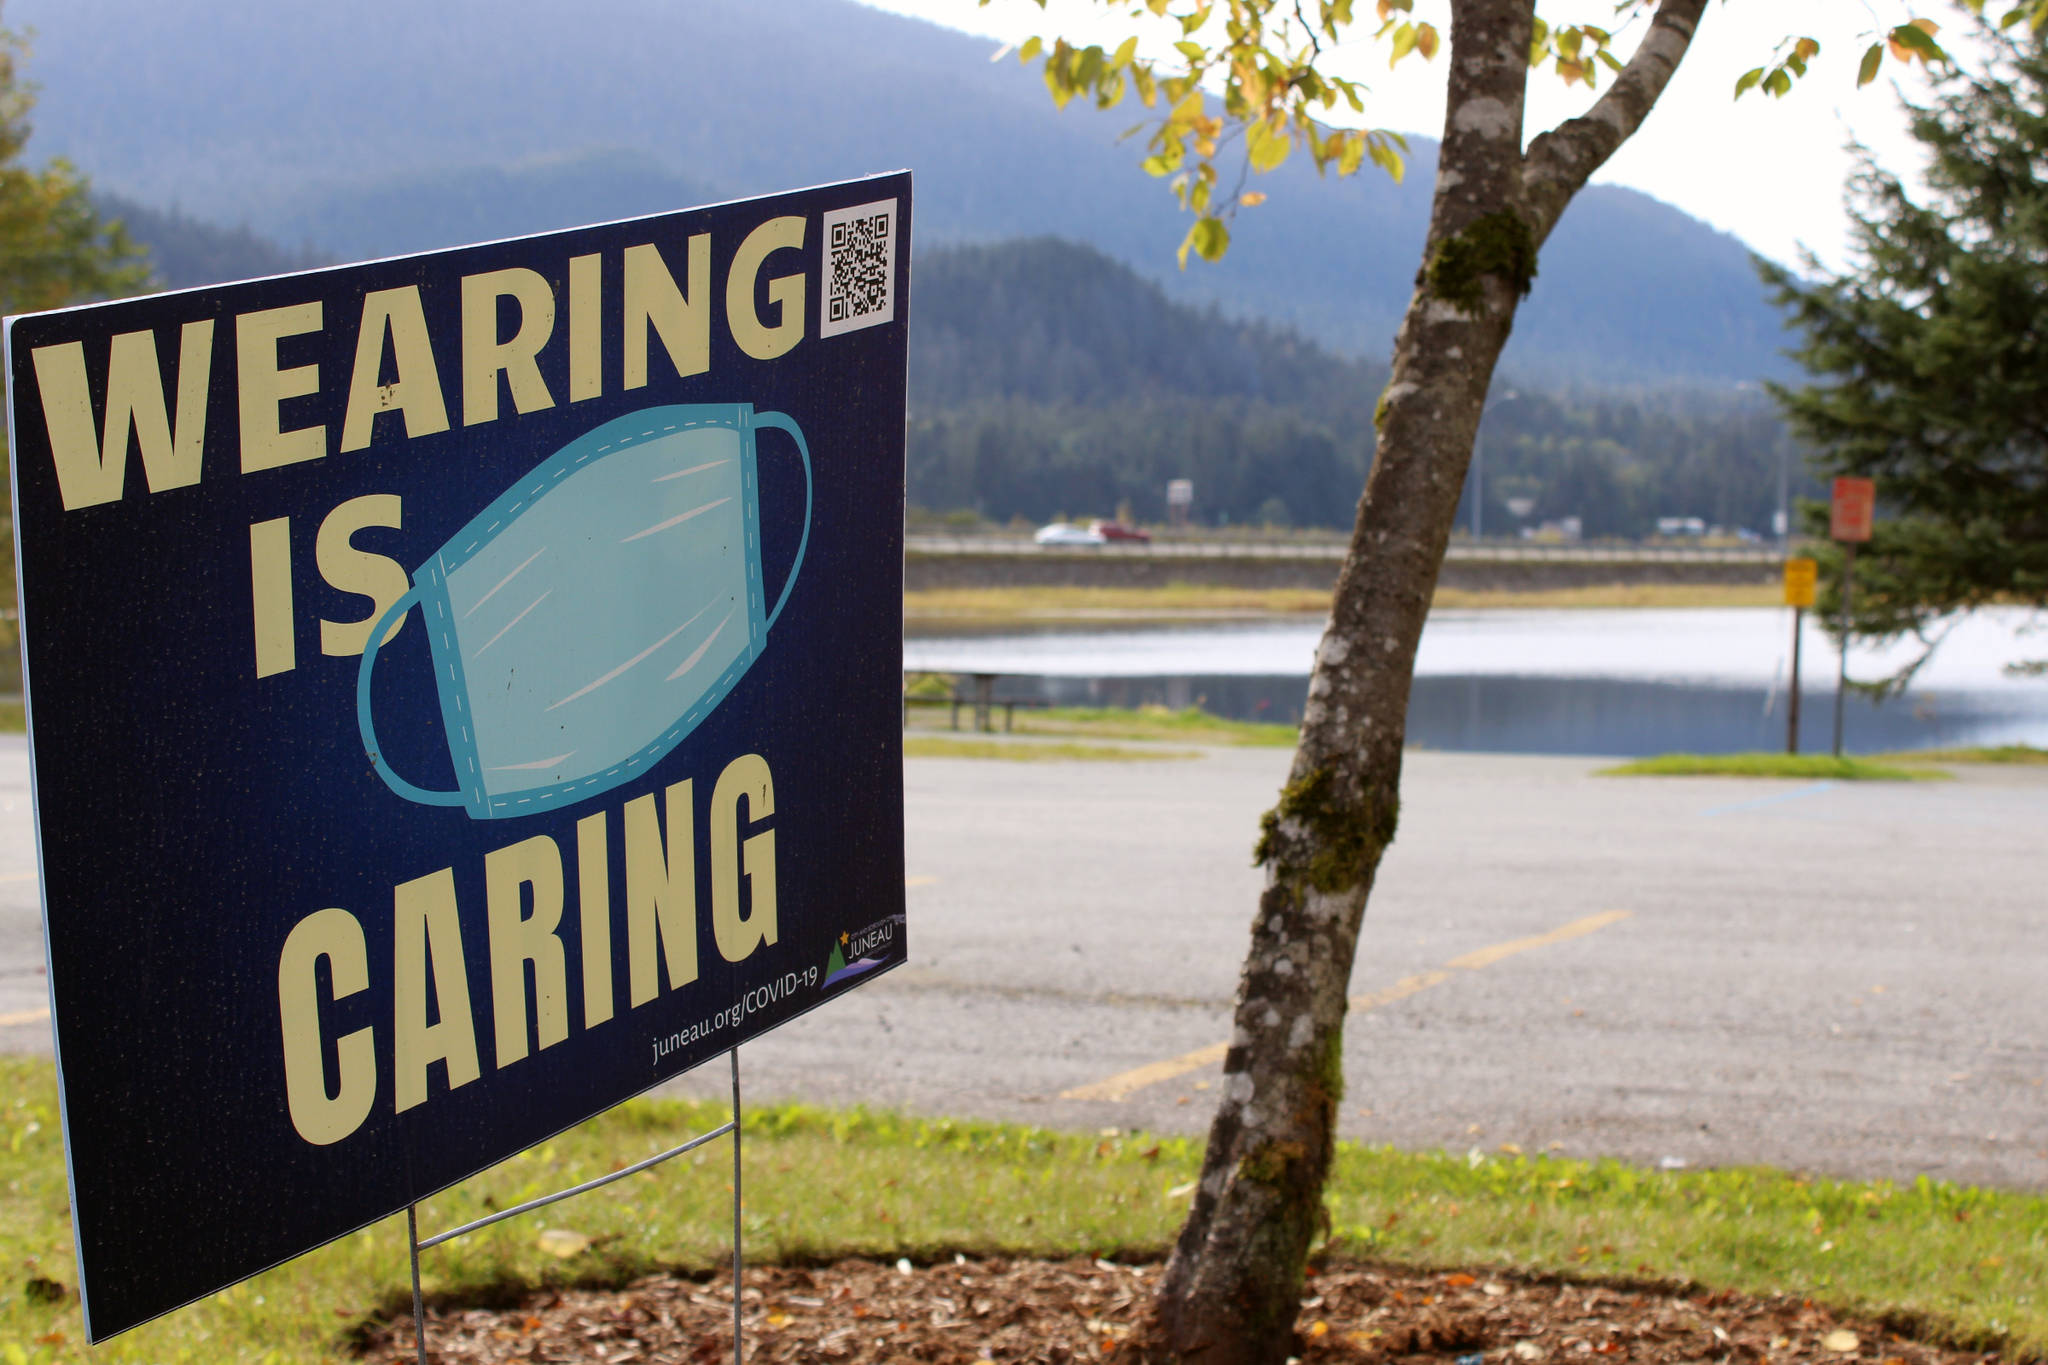 A sign seen near Twin Lakes on Sept. 17 encourages residents to wear cloth face coverings while in public. A social gathering tied to a recent cluster of cases of COVID-19 is unlikely to lead to punishment, but city officials are hopeful it may encourage people to be more cautious. (Ben Hohenstatt / Juneau Empire)